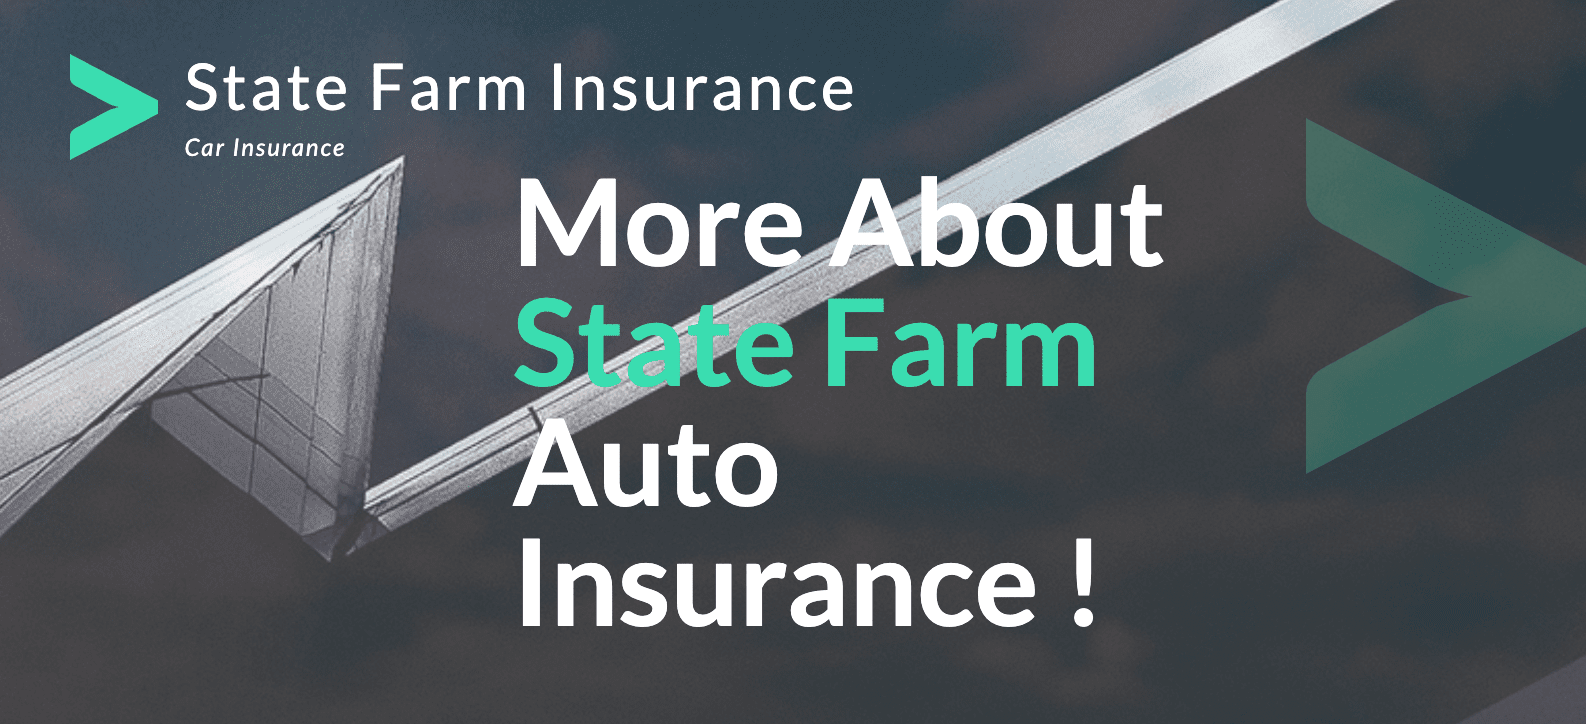 More About State Farm Auto Insurance